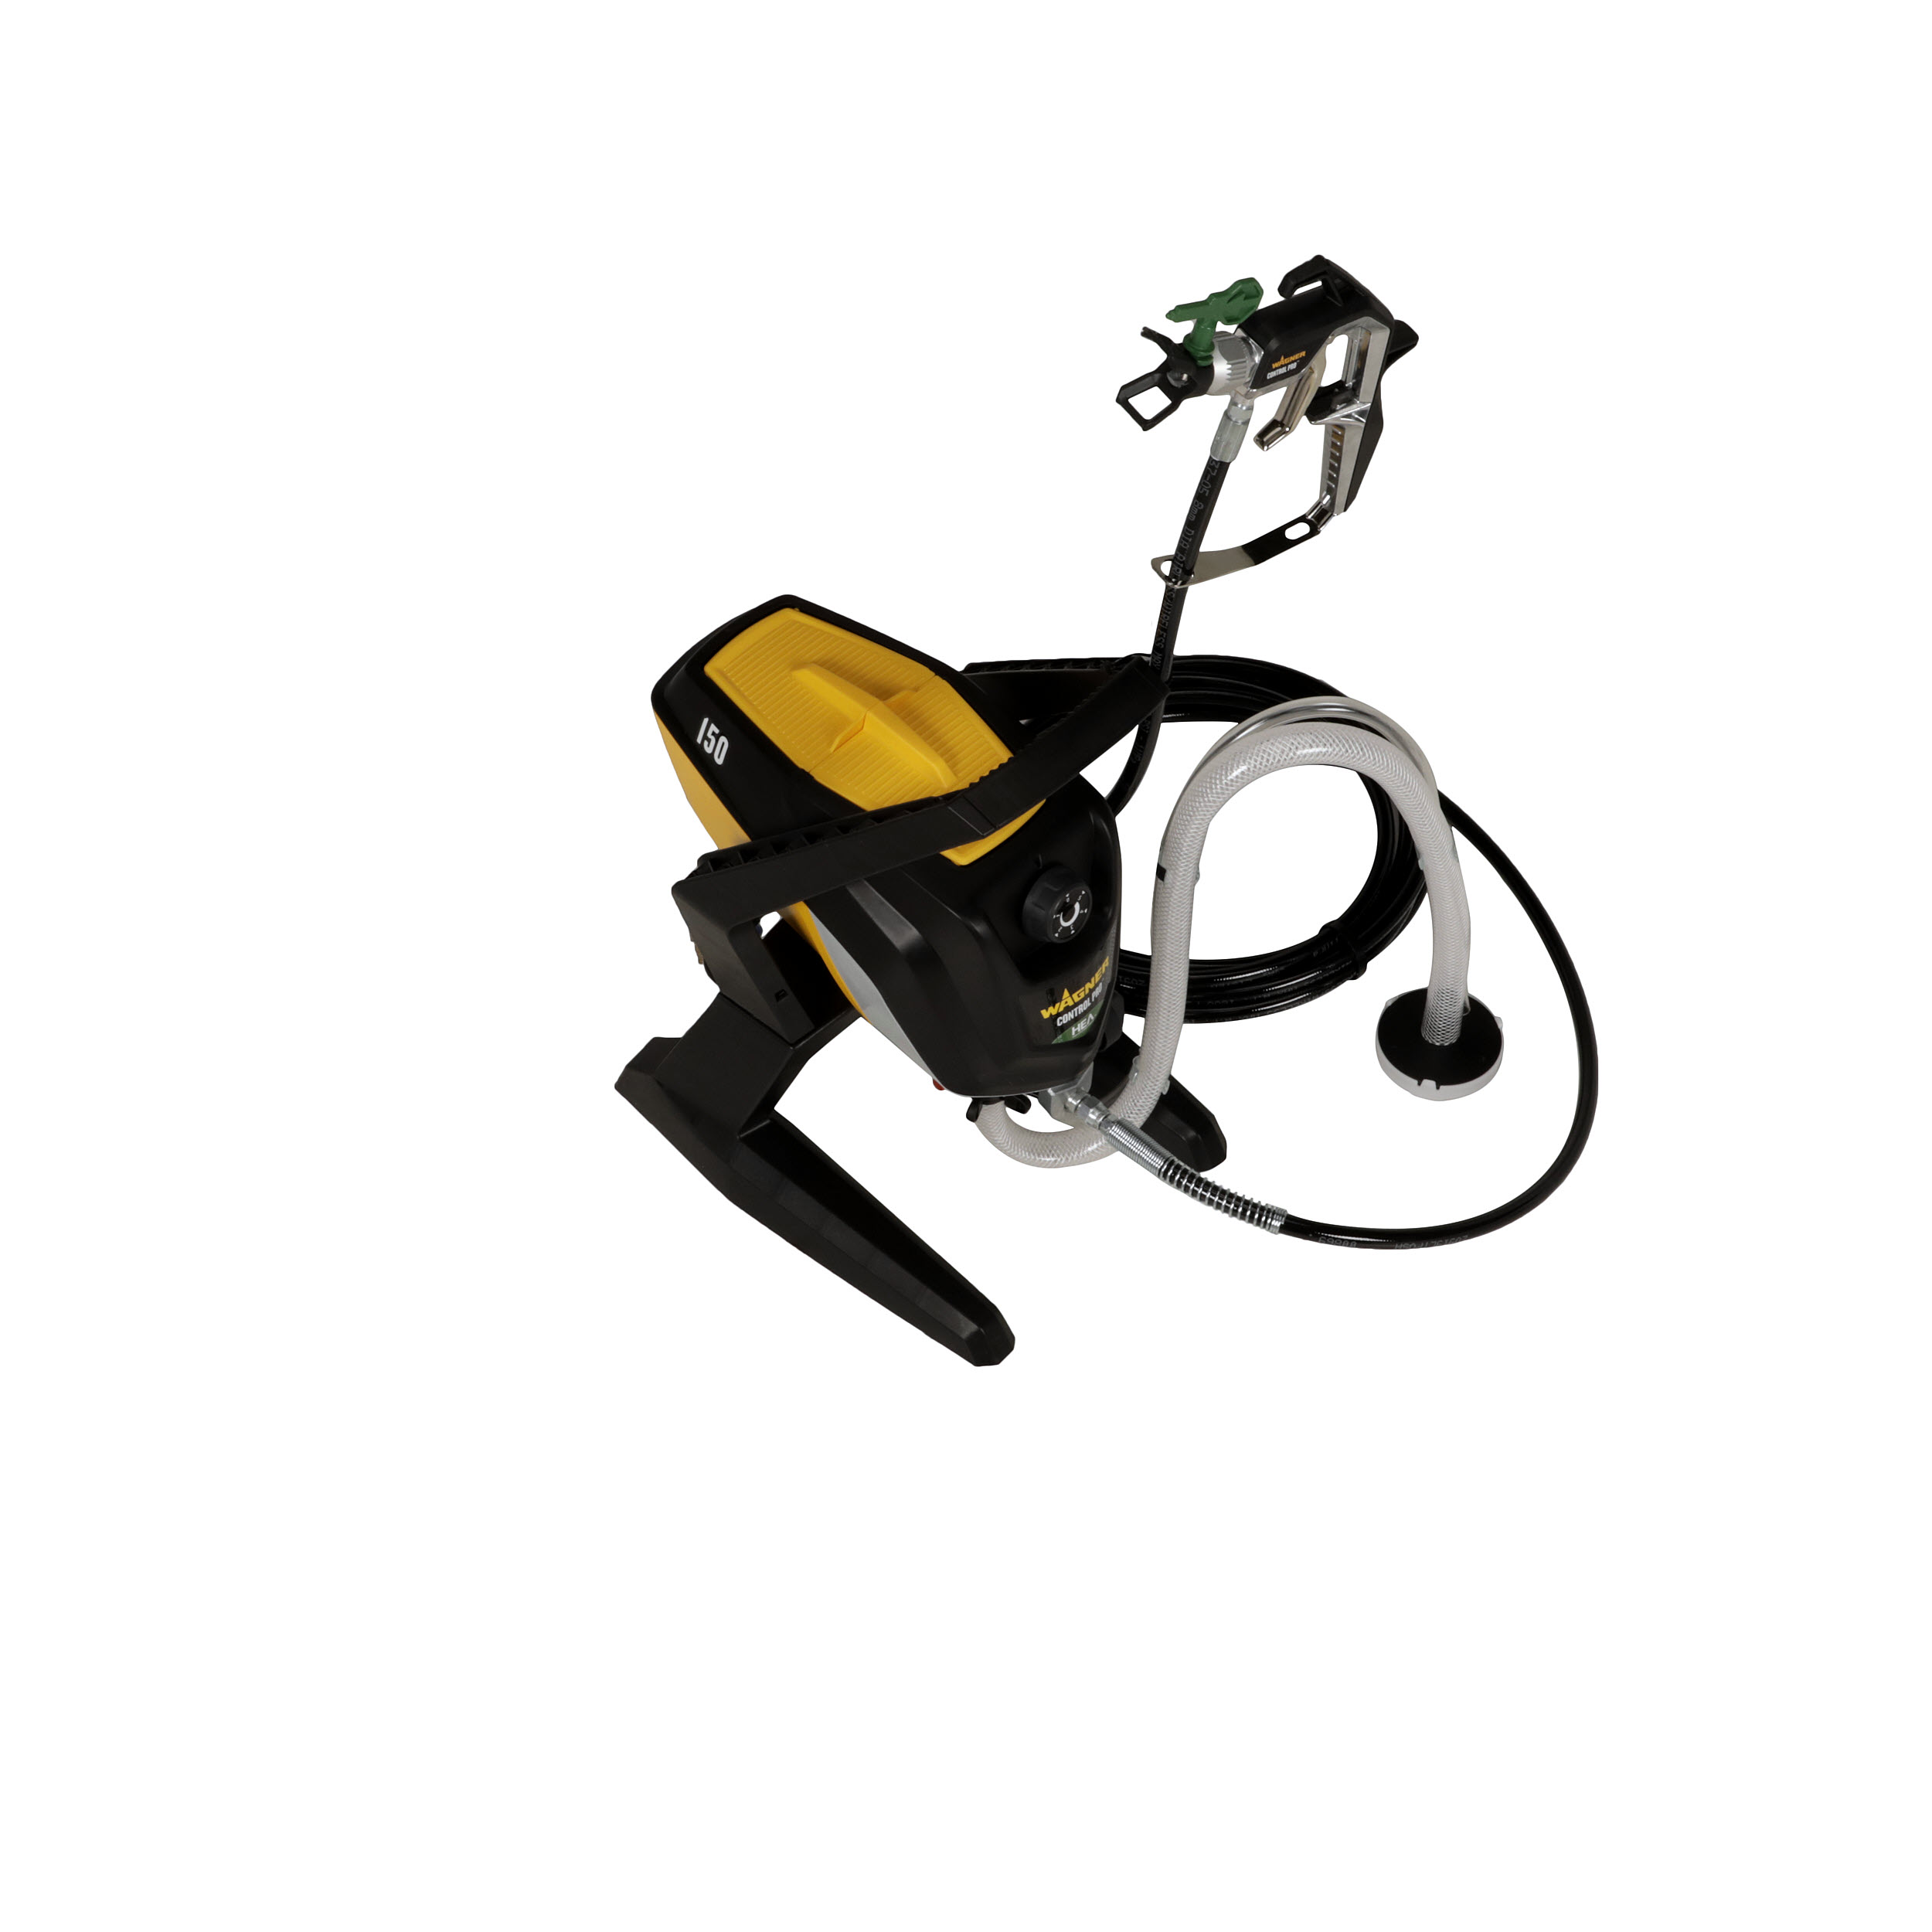 Wagner Control Pro 150 High-Efficiency Airless Sprayer — Includes 25ft.  Hose, Model# 0580000